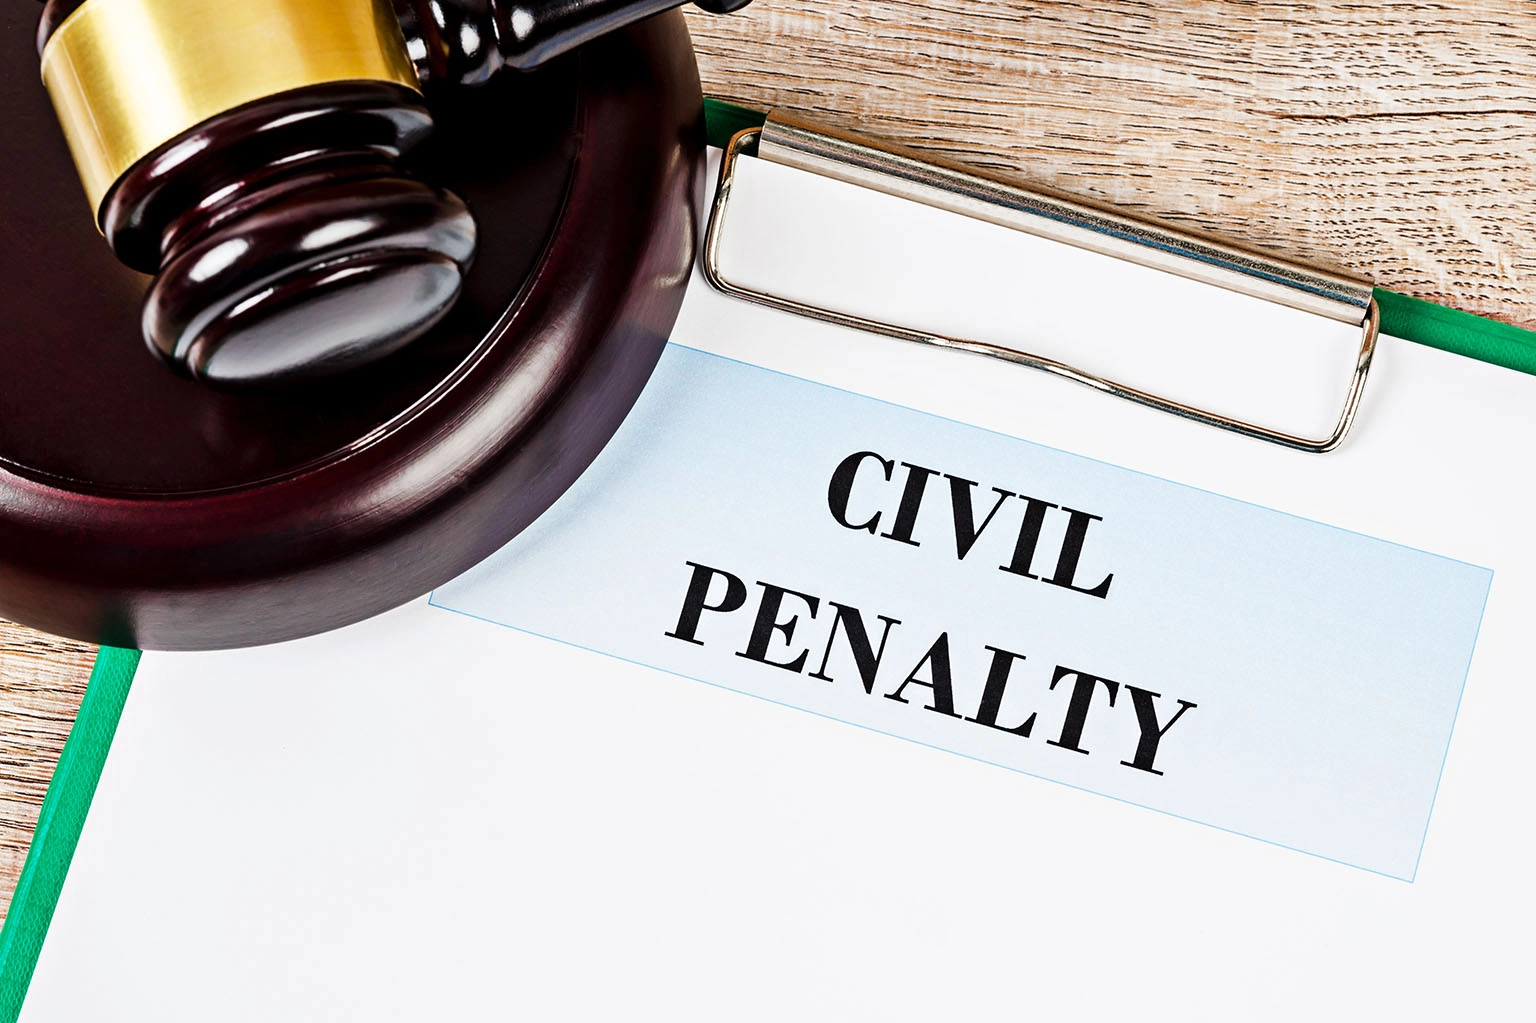 UK Penalties for Employing Illegal Workers to Significantly Increase